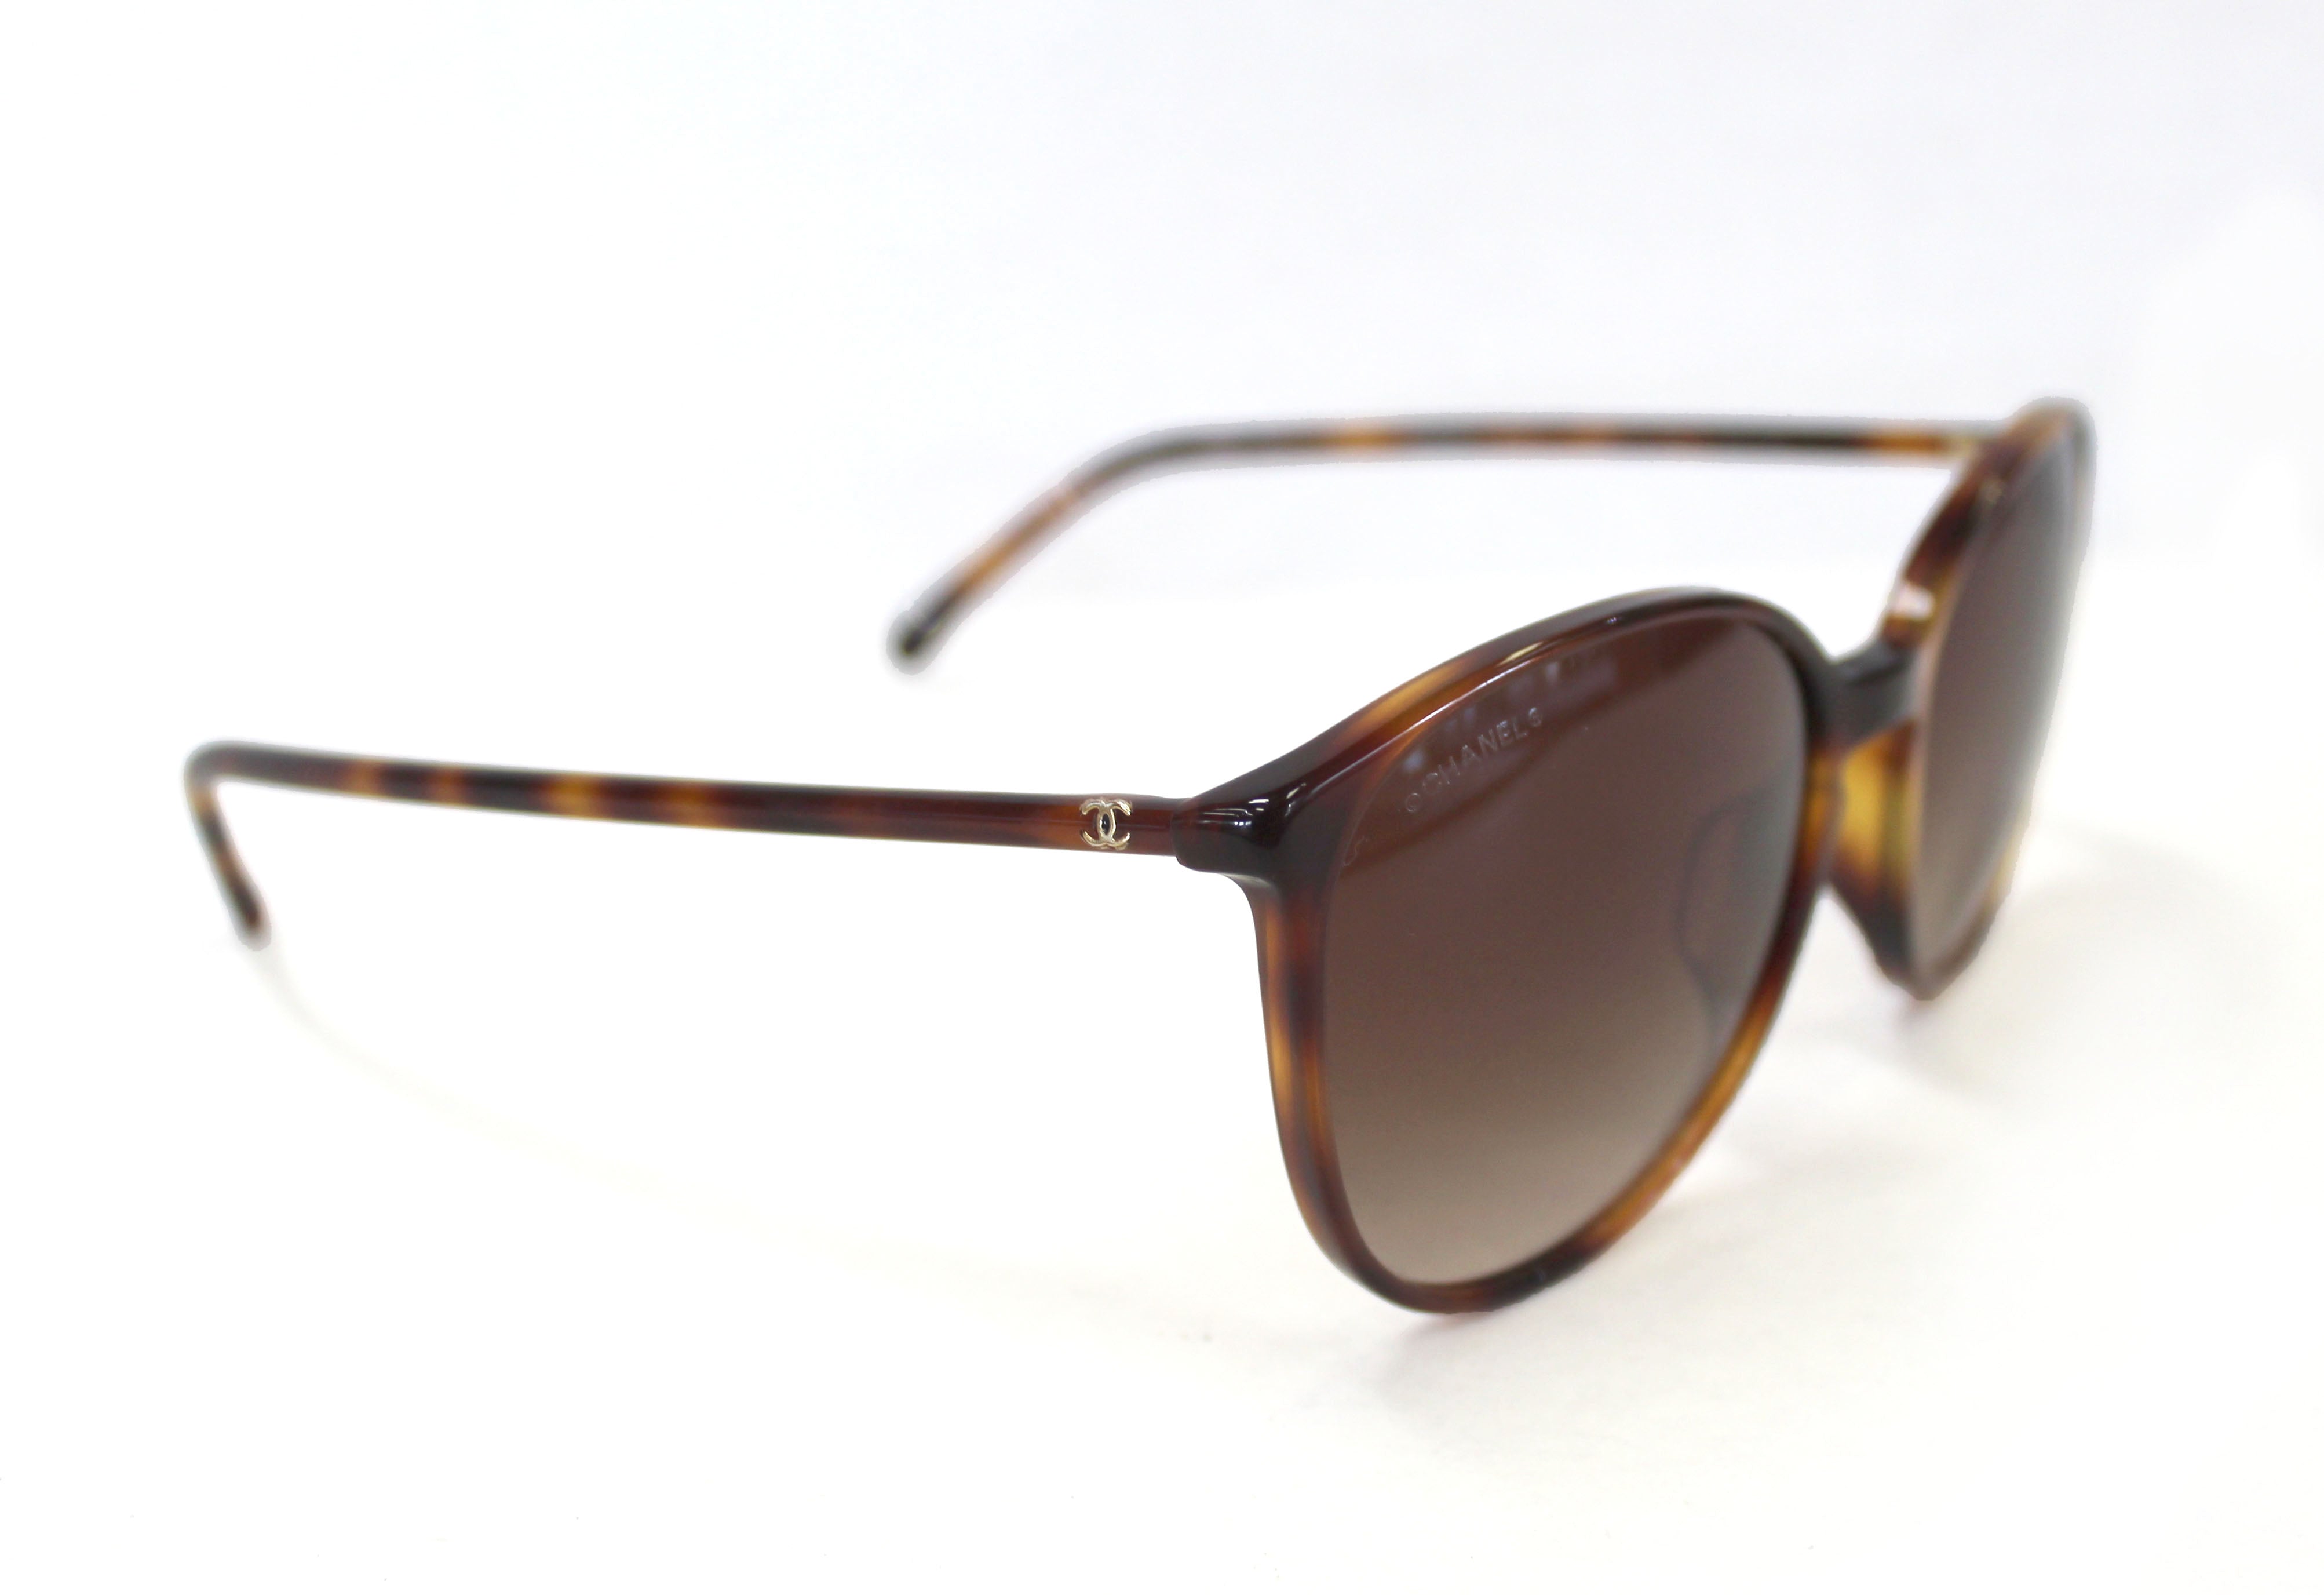 Authentic Chanel tortoise shell sunglasses 5278-A